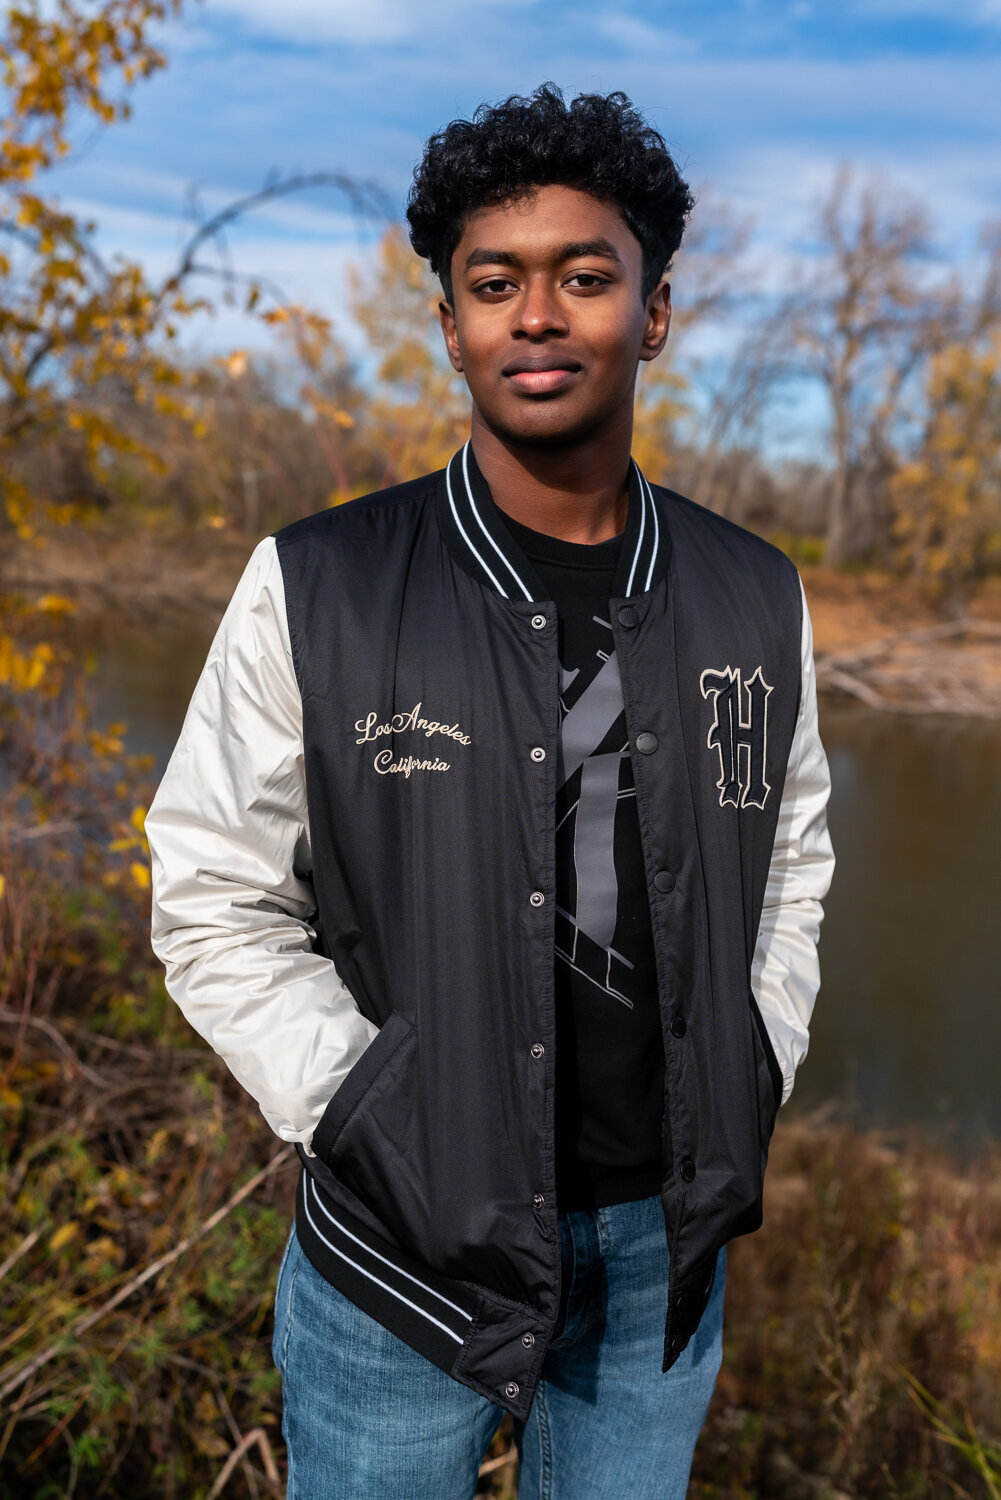 Senior Indian boy smiles in letter jacket in front of the lake.